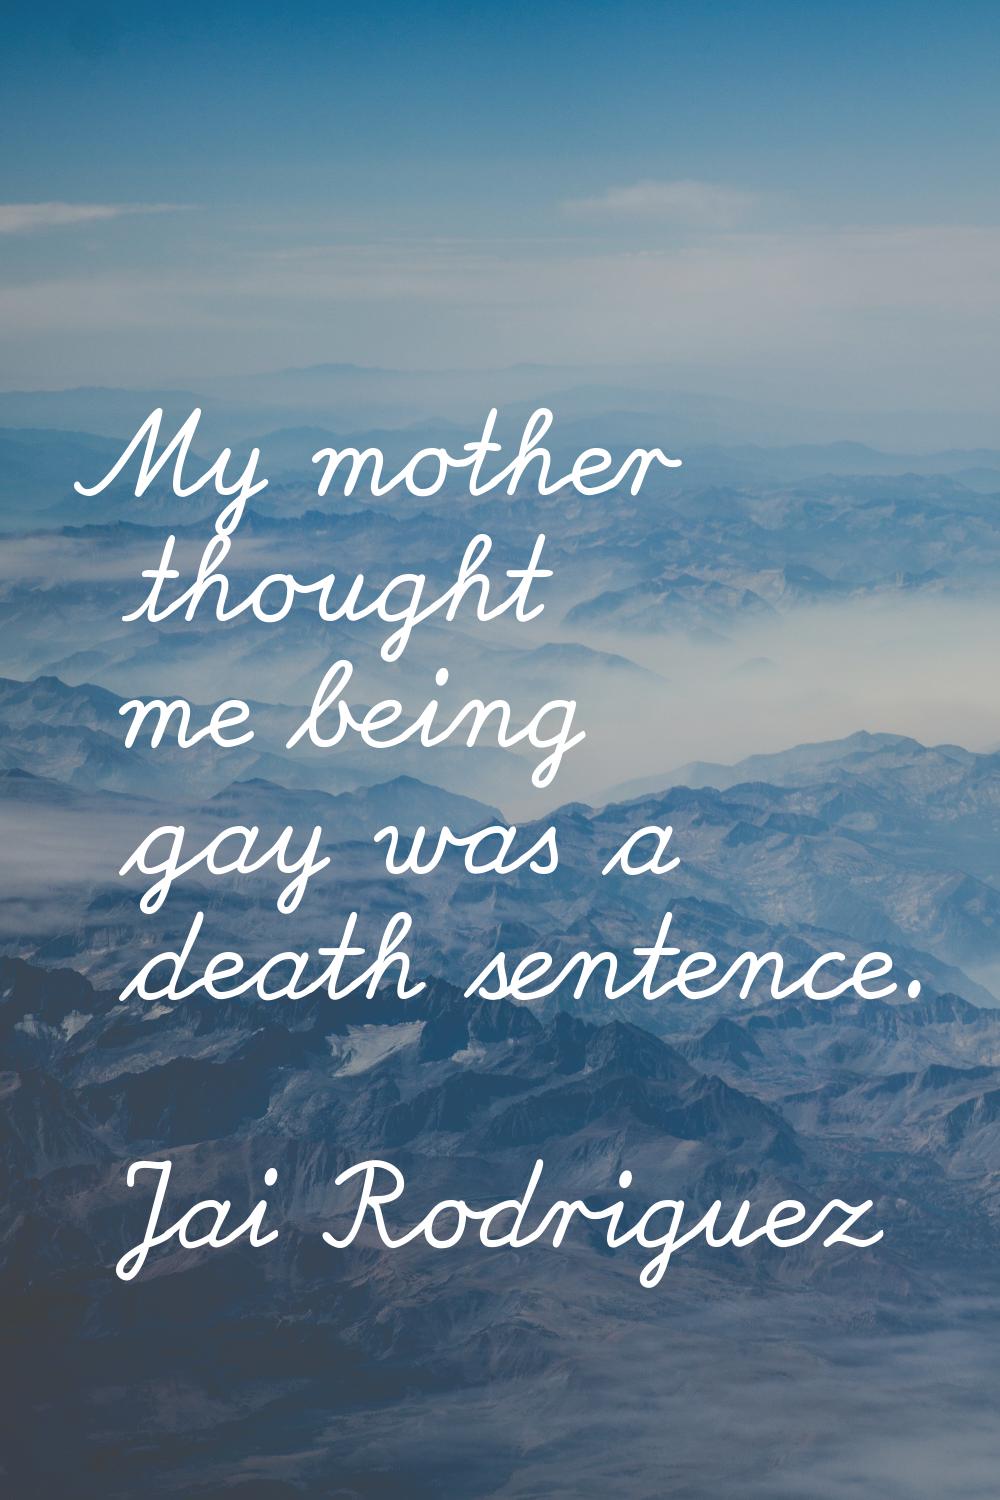 My mother thought me being gay was a death sentence.